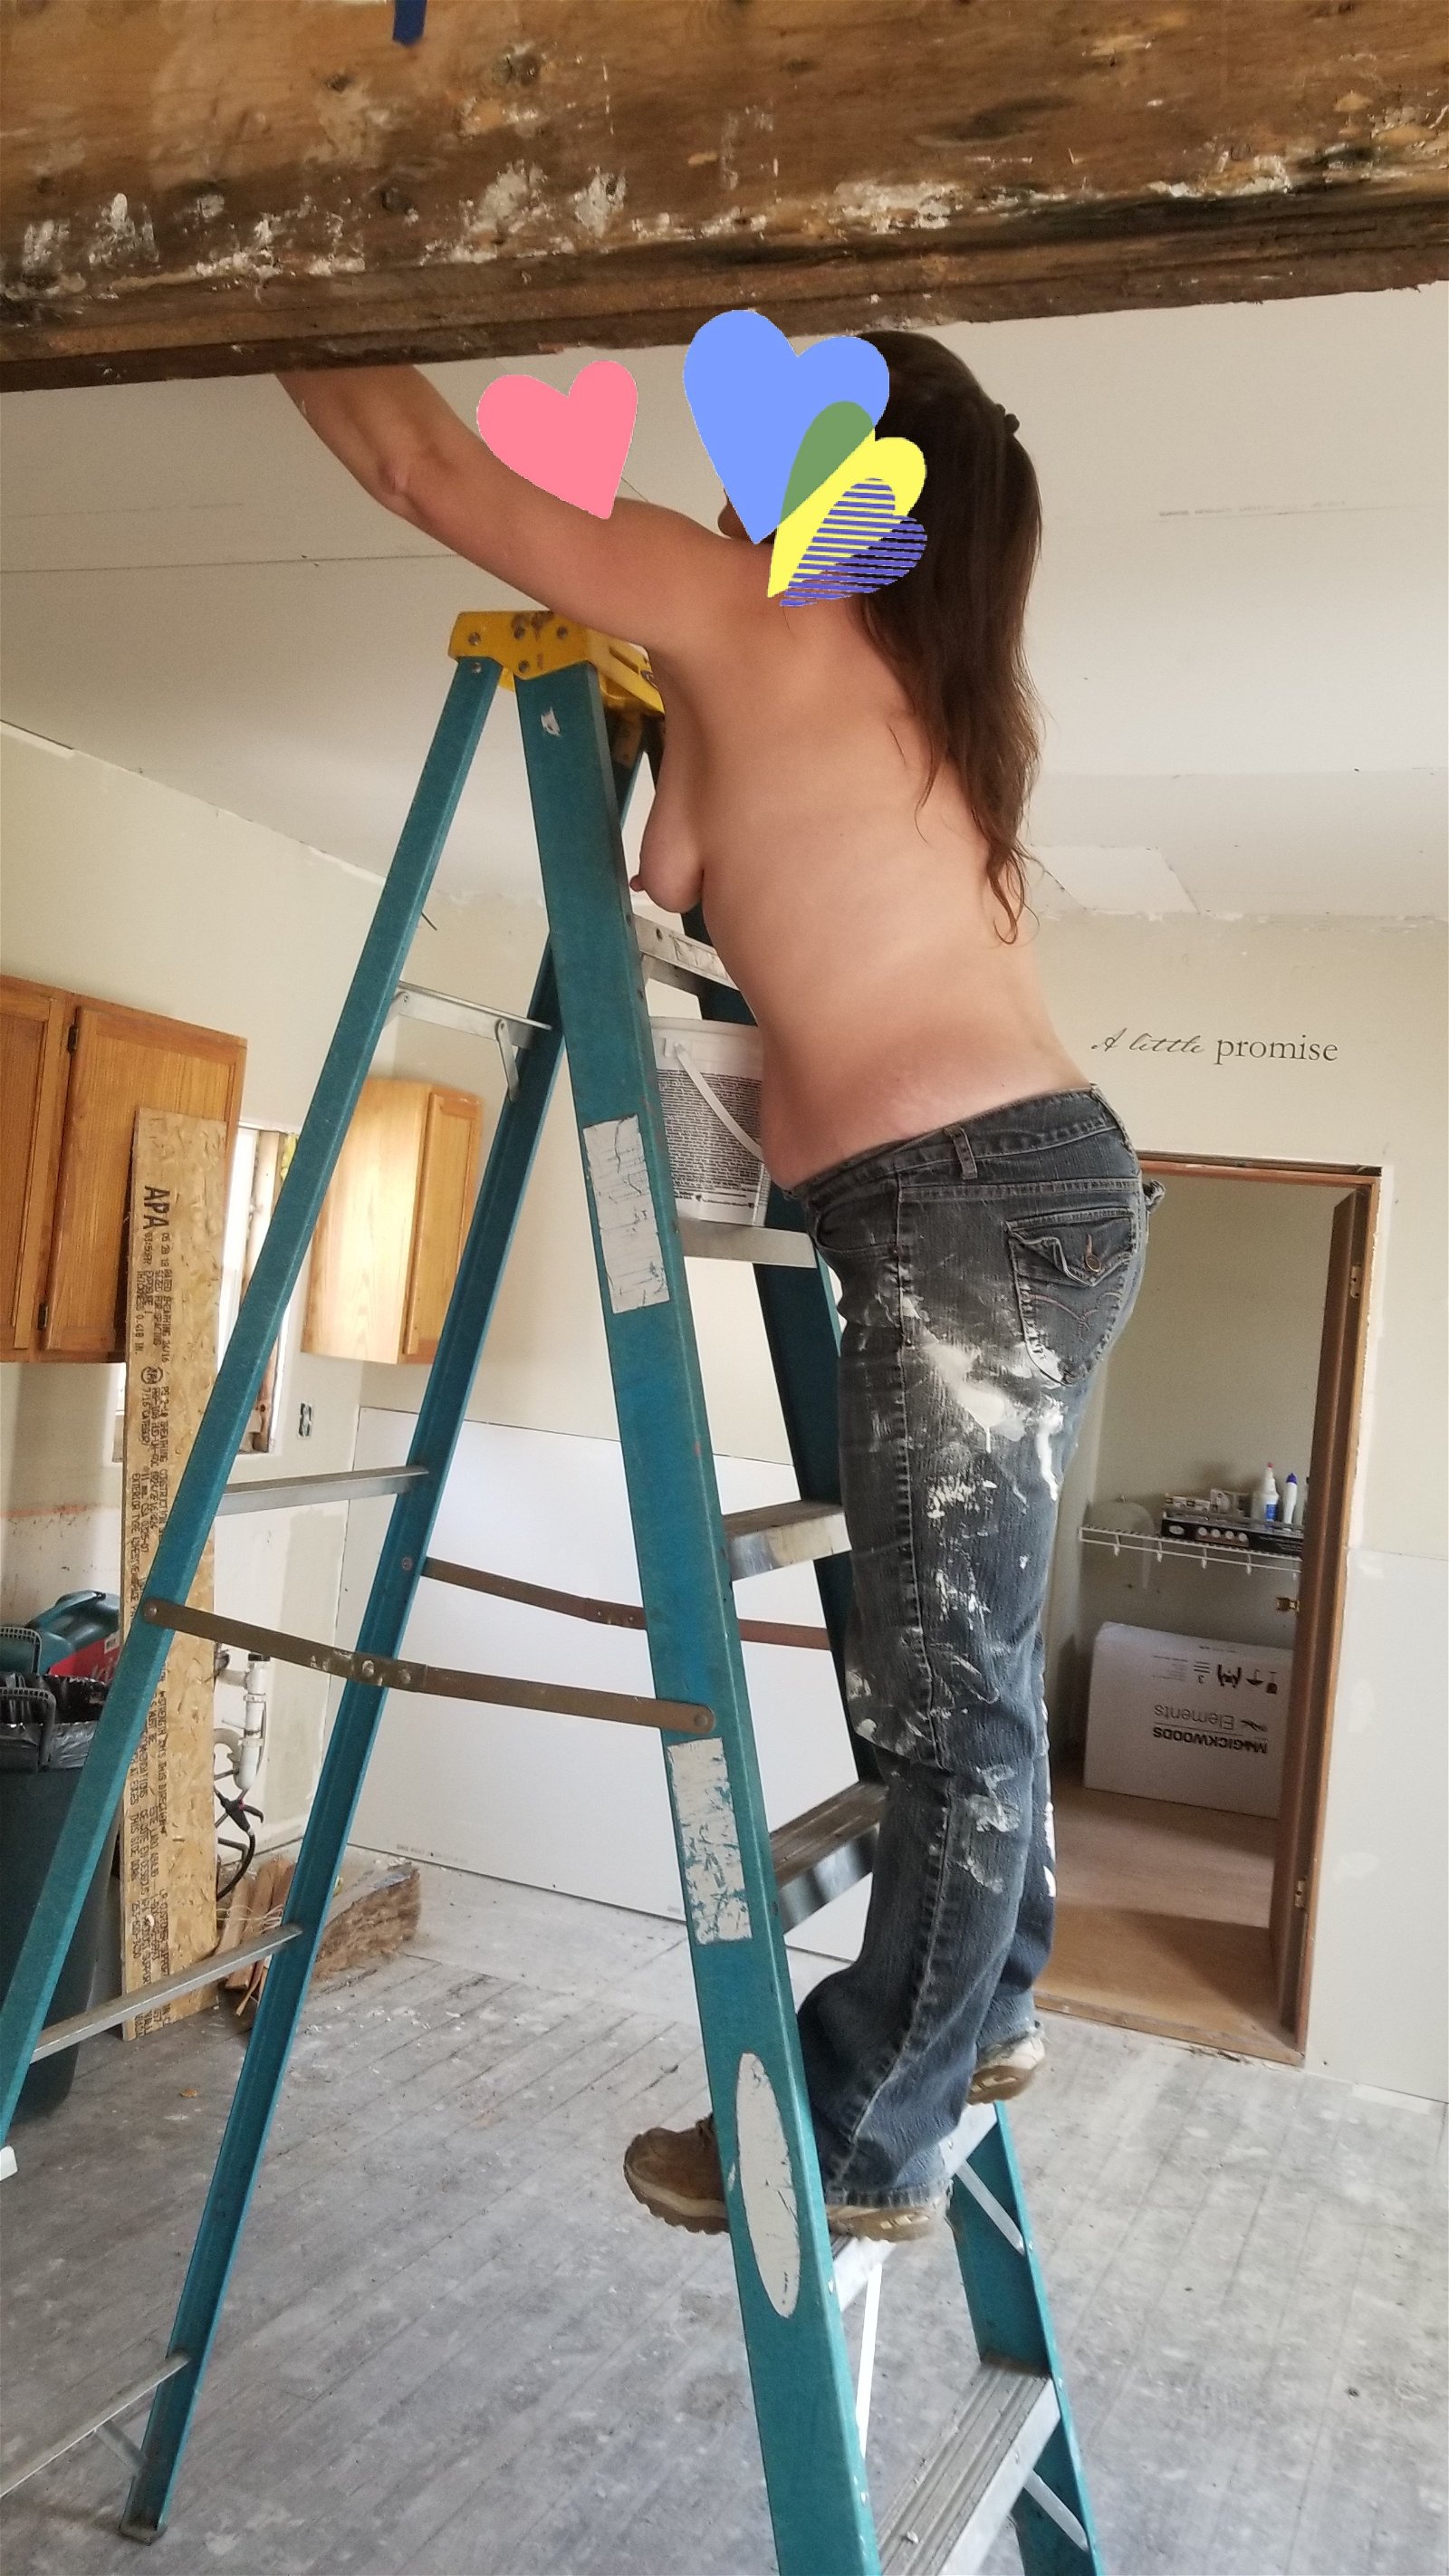 Watch the Photo by IowaHotwife with the username @SirJLOneG, who is a verified user, posted on February 7, 2019. The post is about the topic Hotwife. and the text says 'Always productive when you have a hot wife to help the contractors'